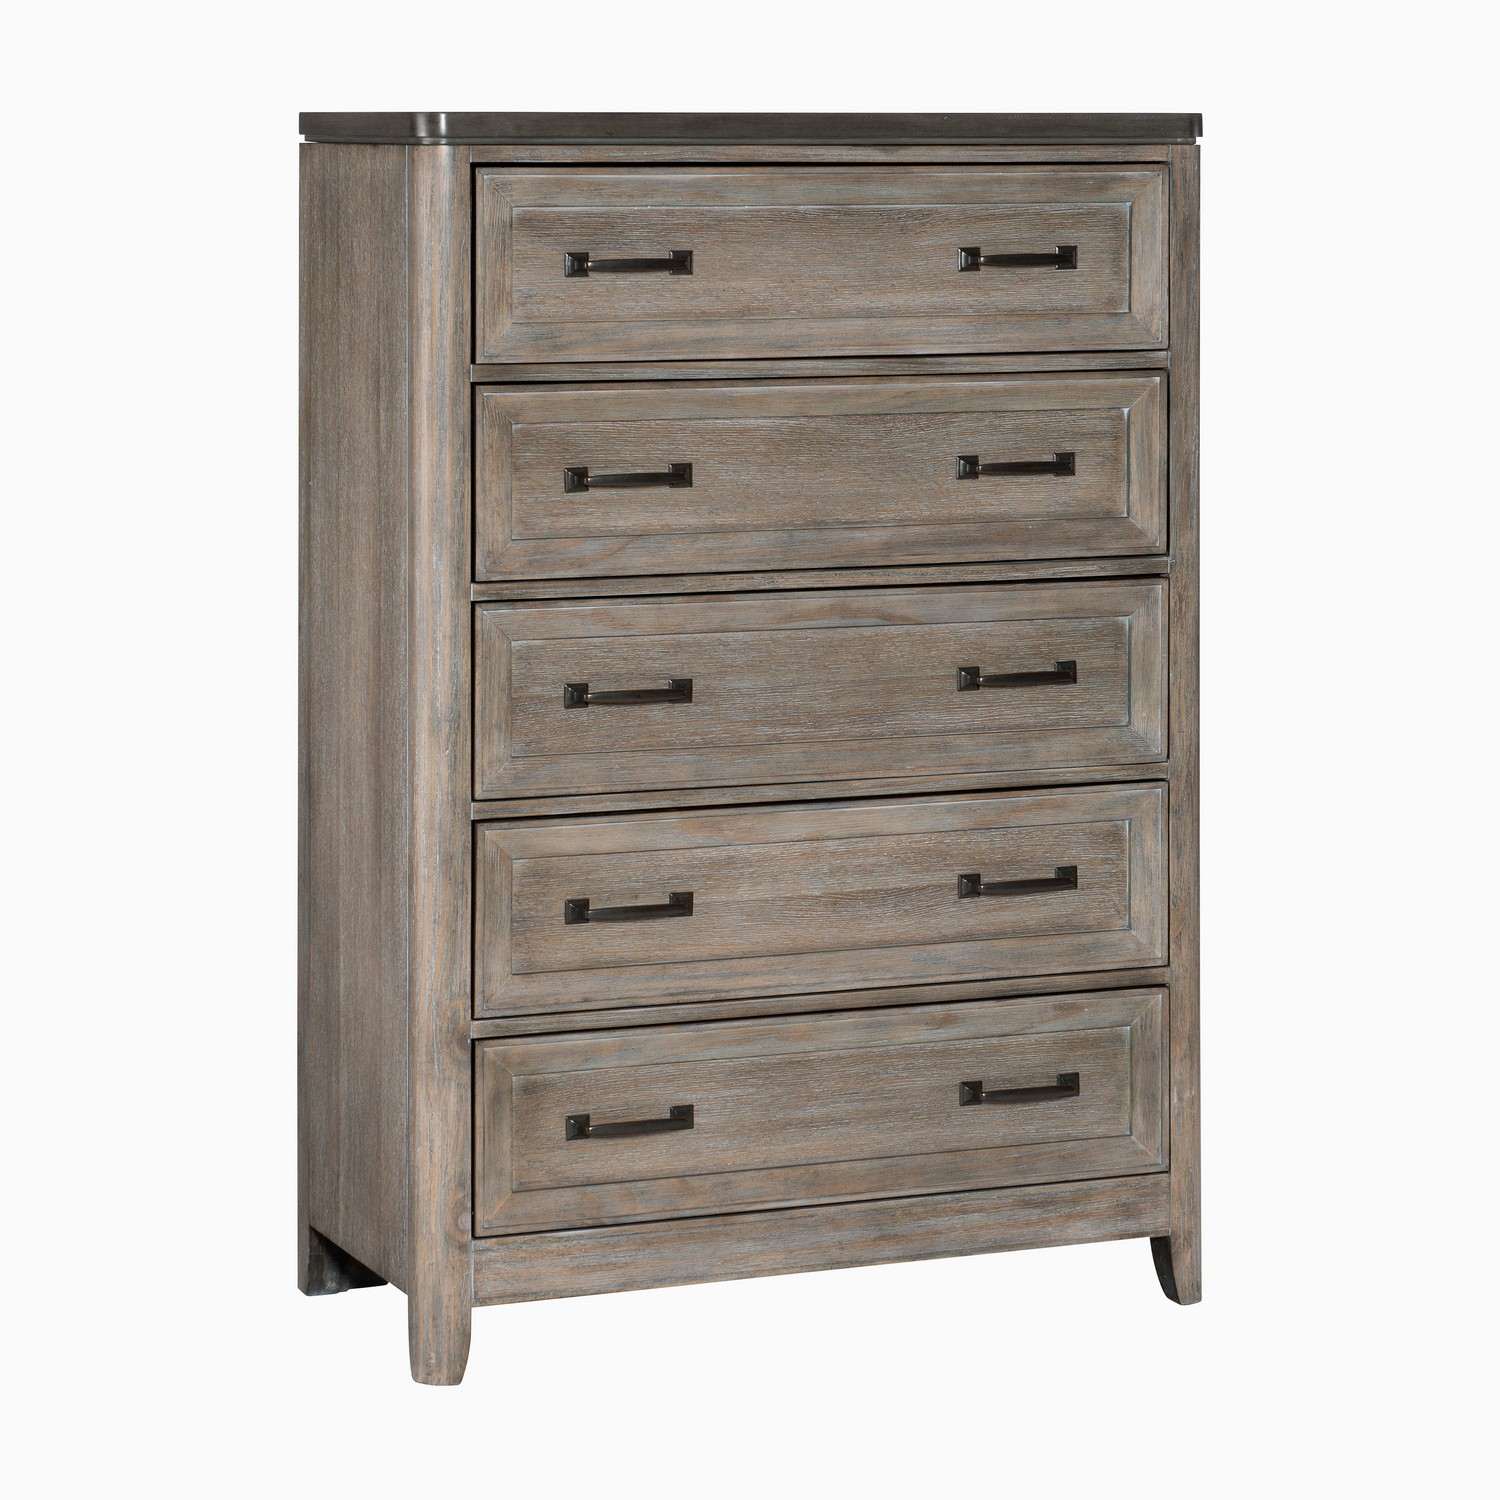 Homelegance Newell Chest - Two-tone finish: Brown and Gray